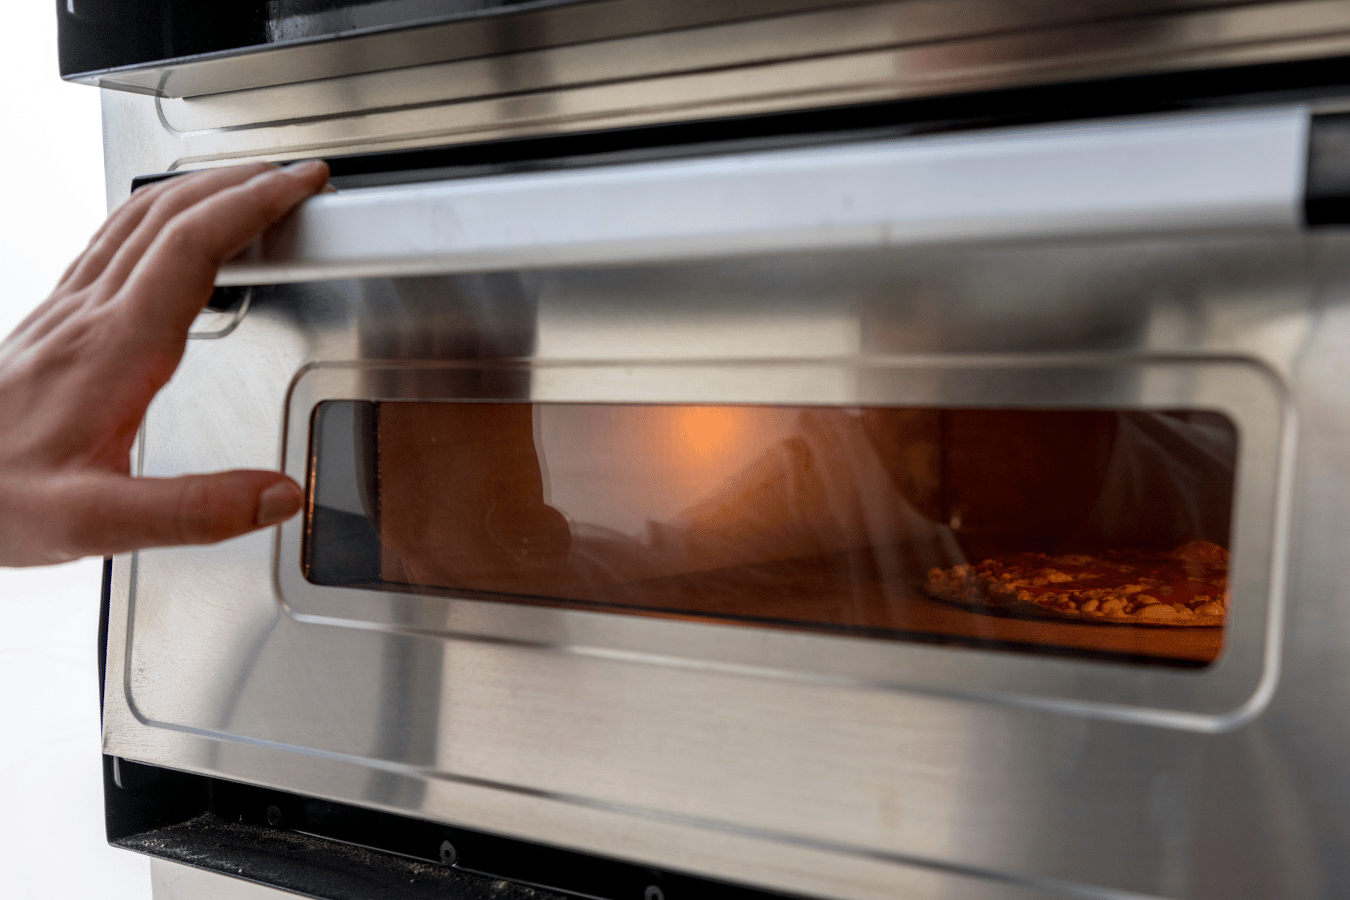 A person is opening the door of a stainless steel oven.